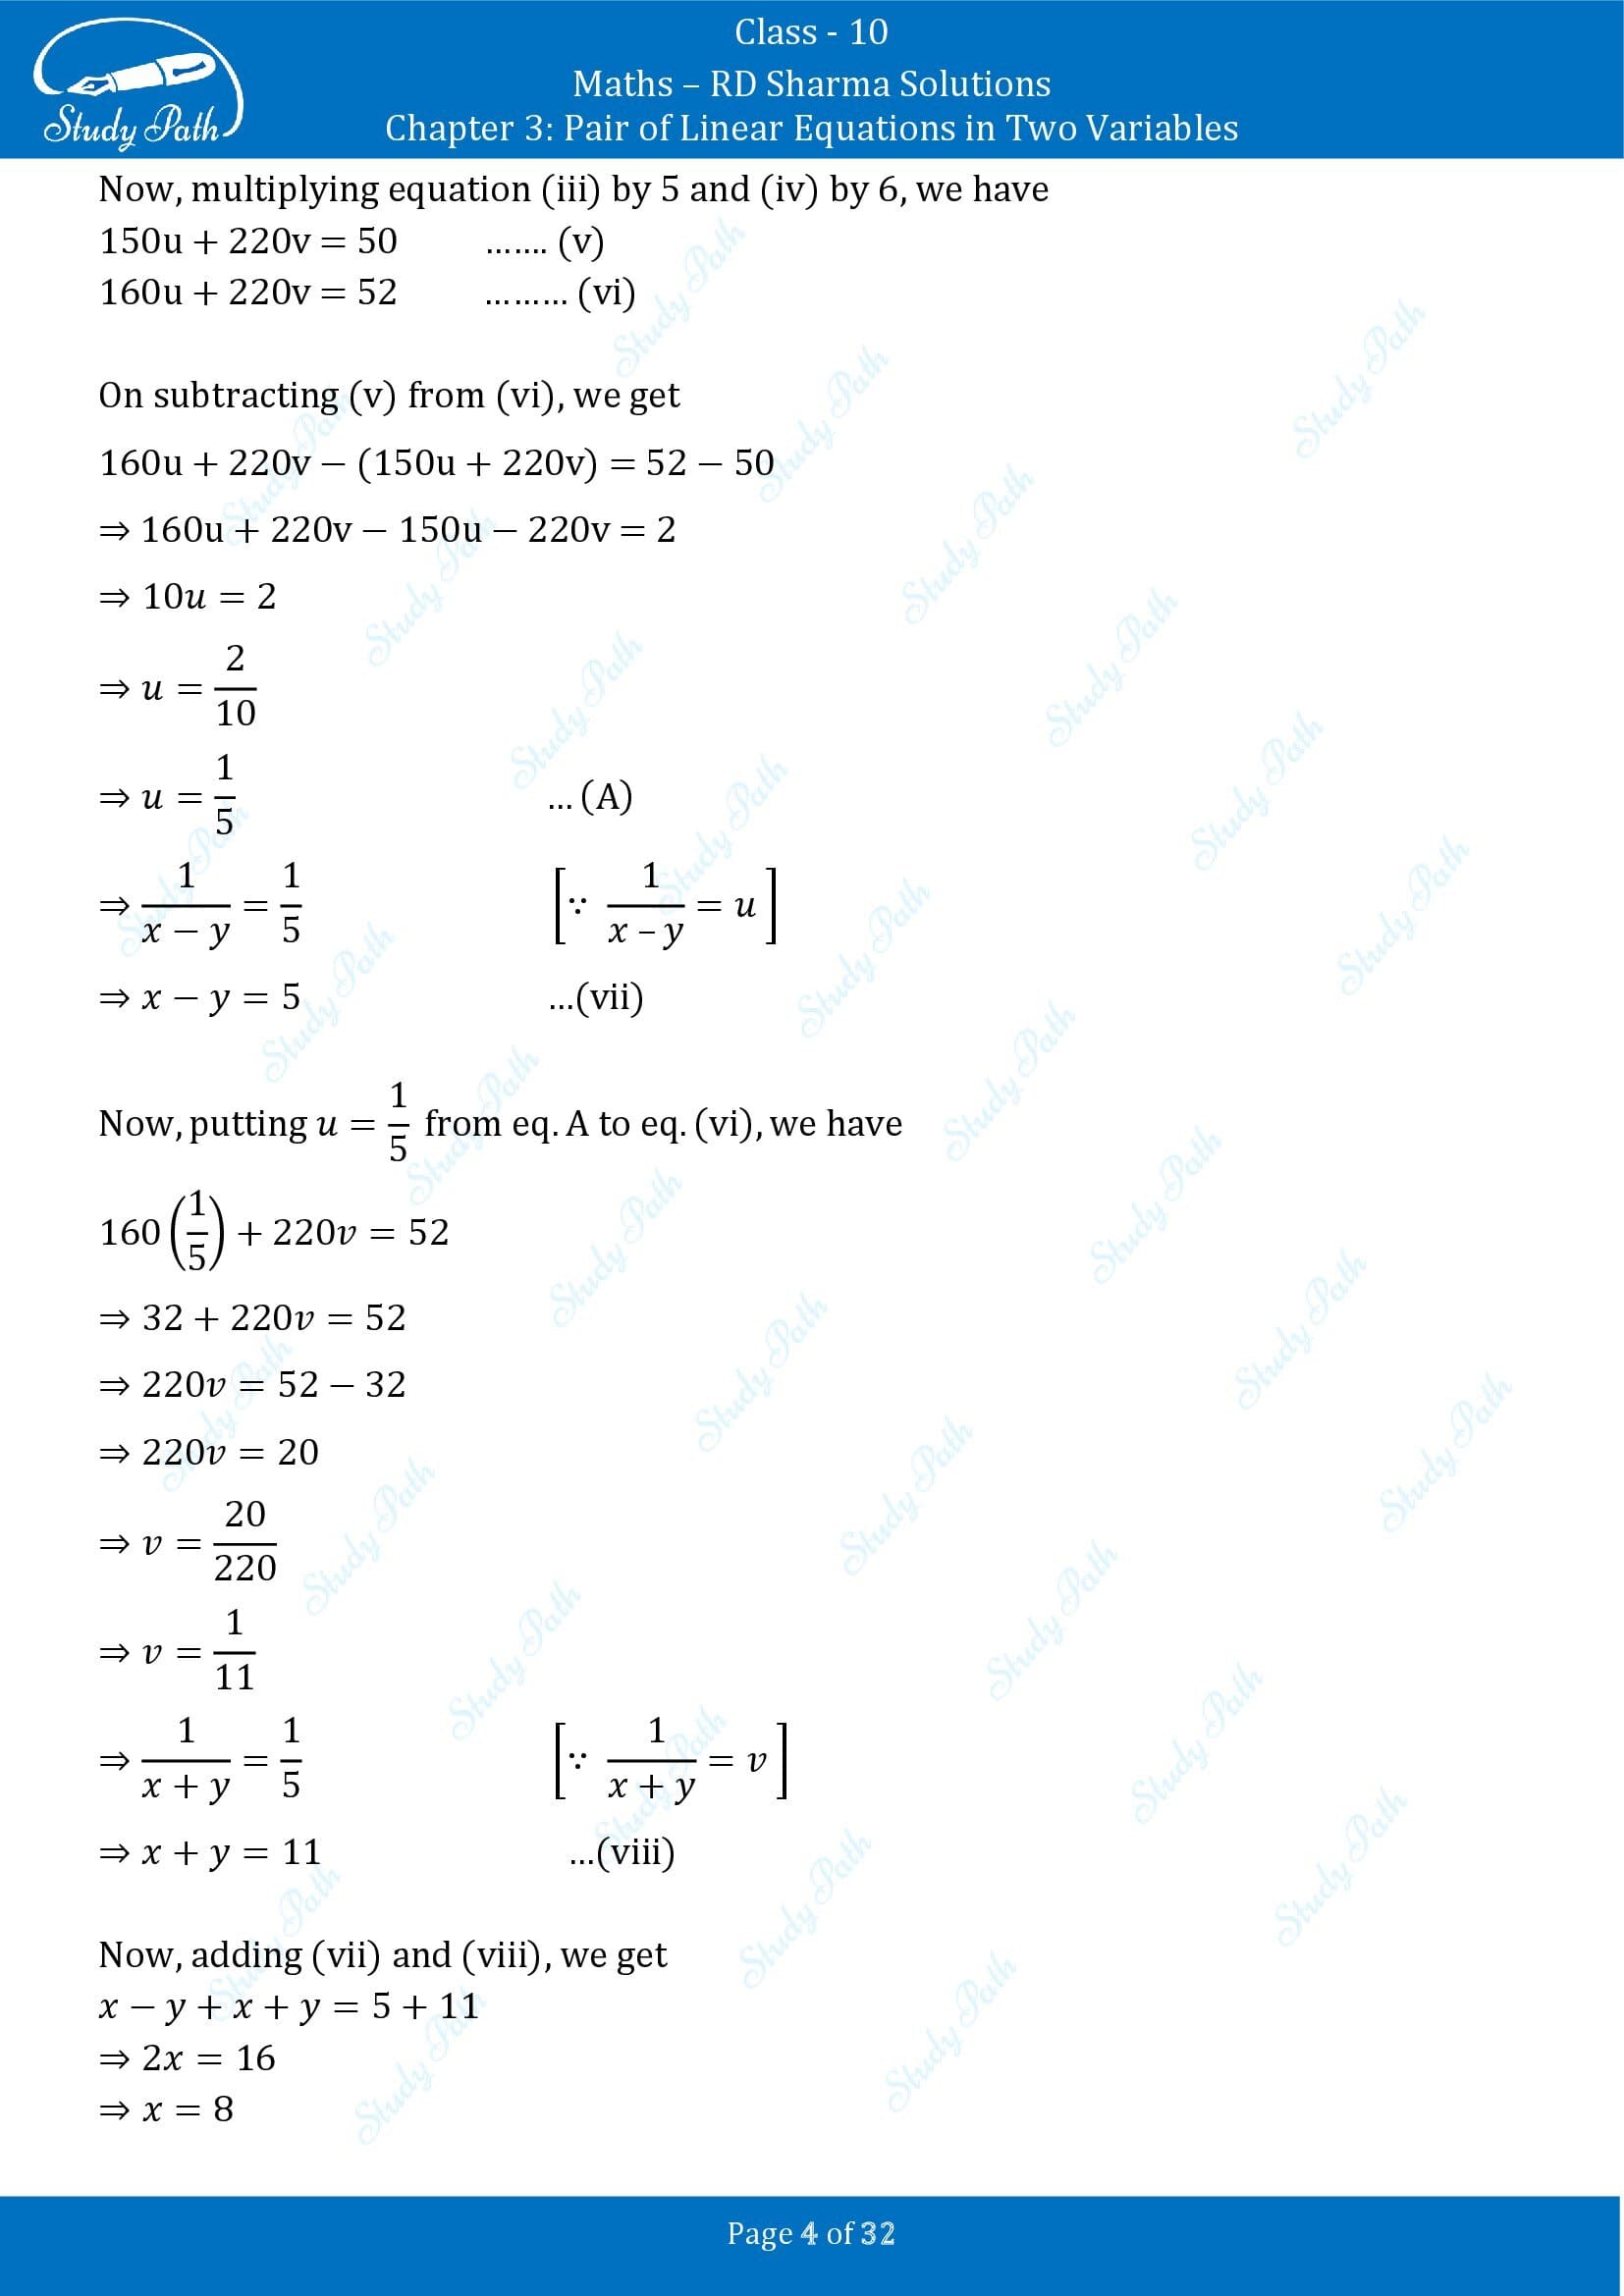 RD Sharma Solutions Class 10 Chapter 3 Pair of Linear Equations in Two Variables Exercise 3.10 00004